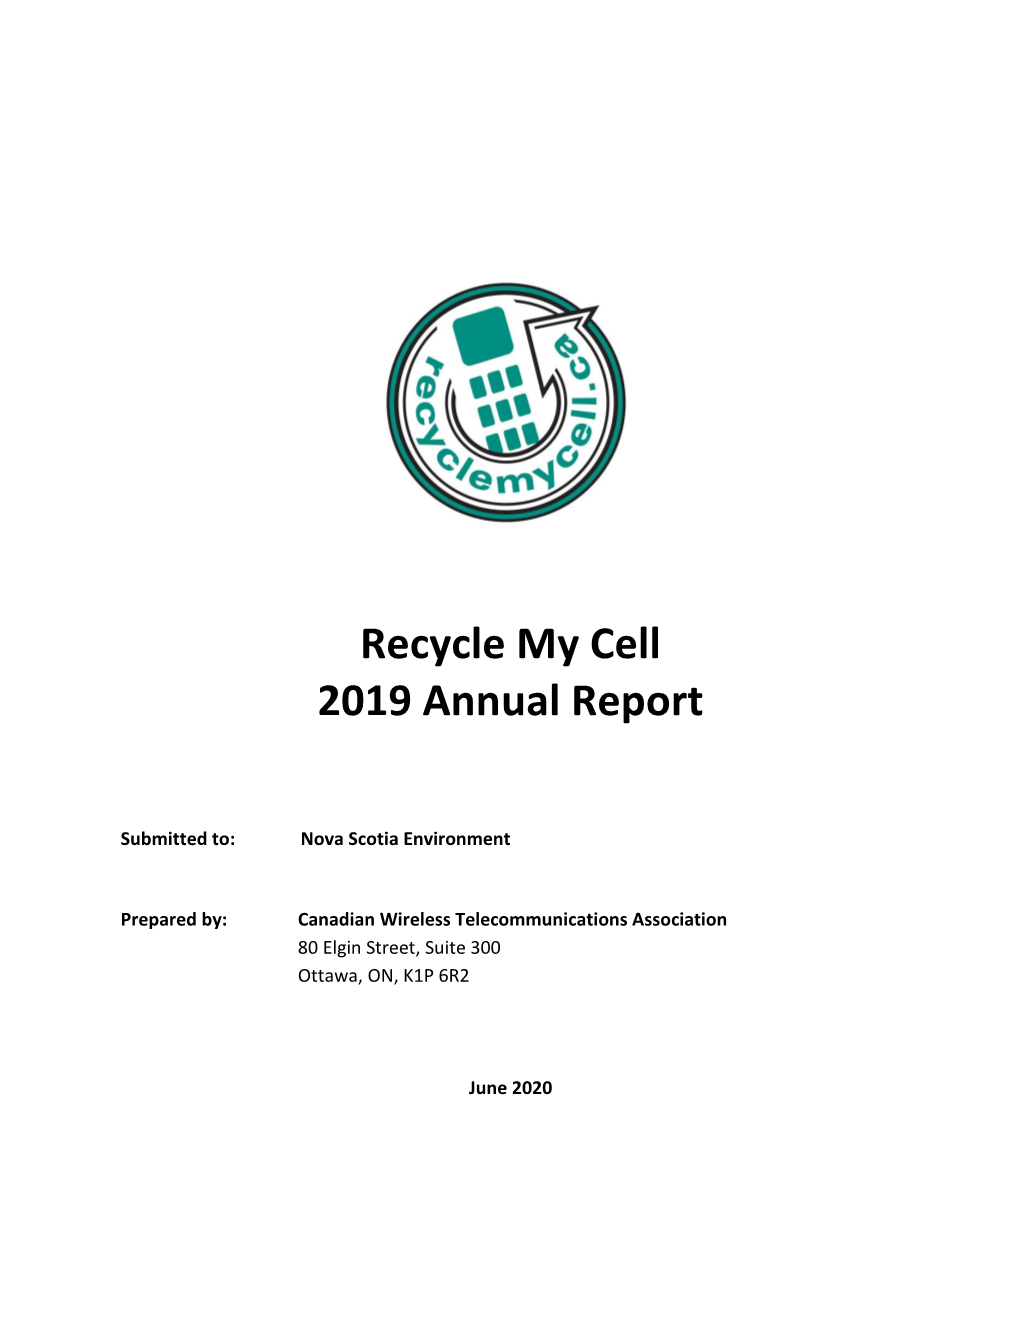 Recycle My Cell 2019 Annual Report